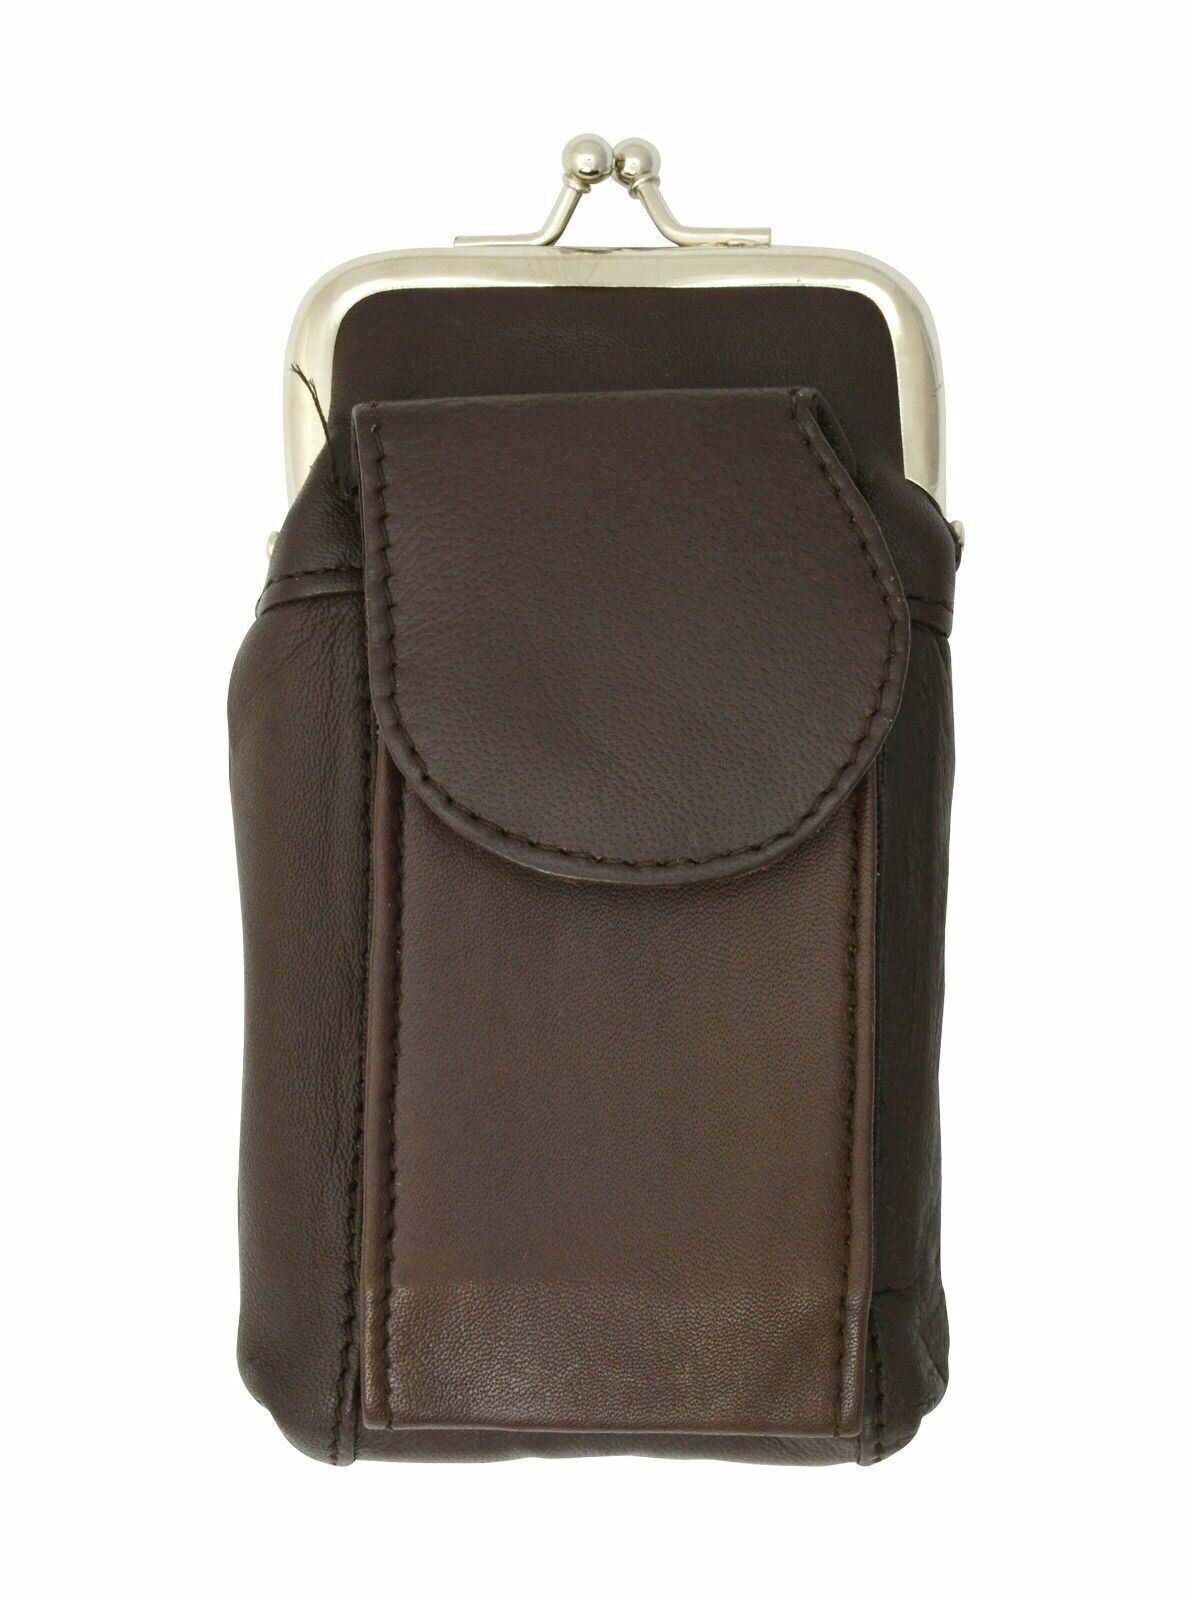 Marshal Leather Brown 100's Cigarette Snap Case Coin Purse